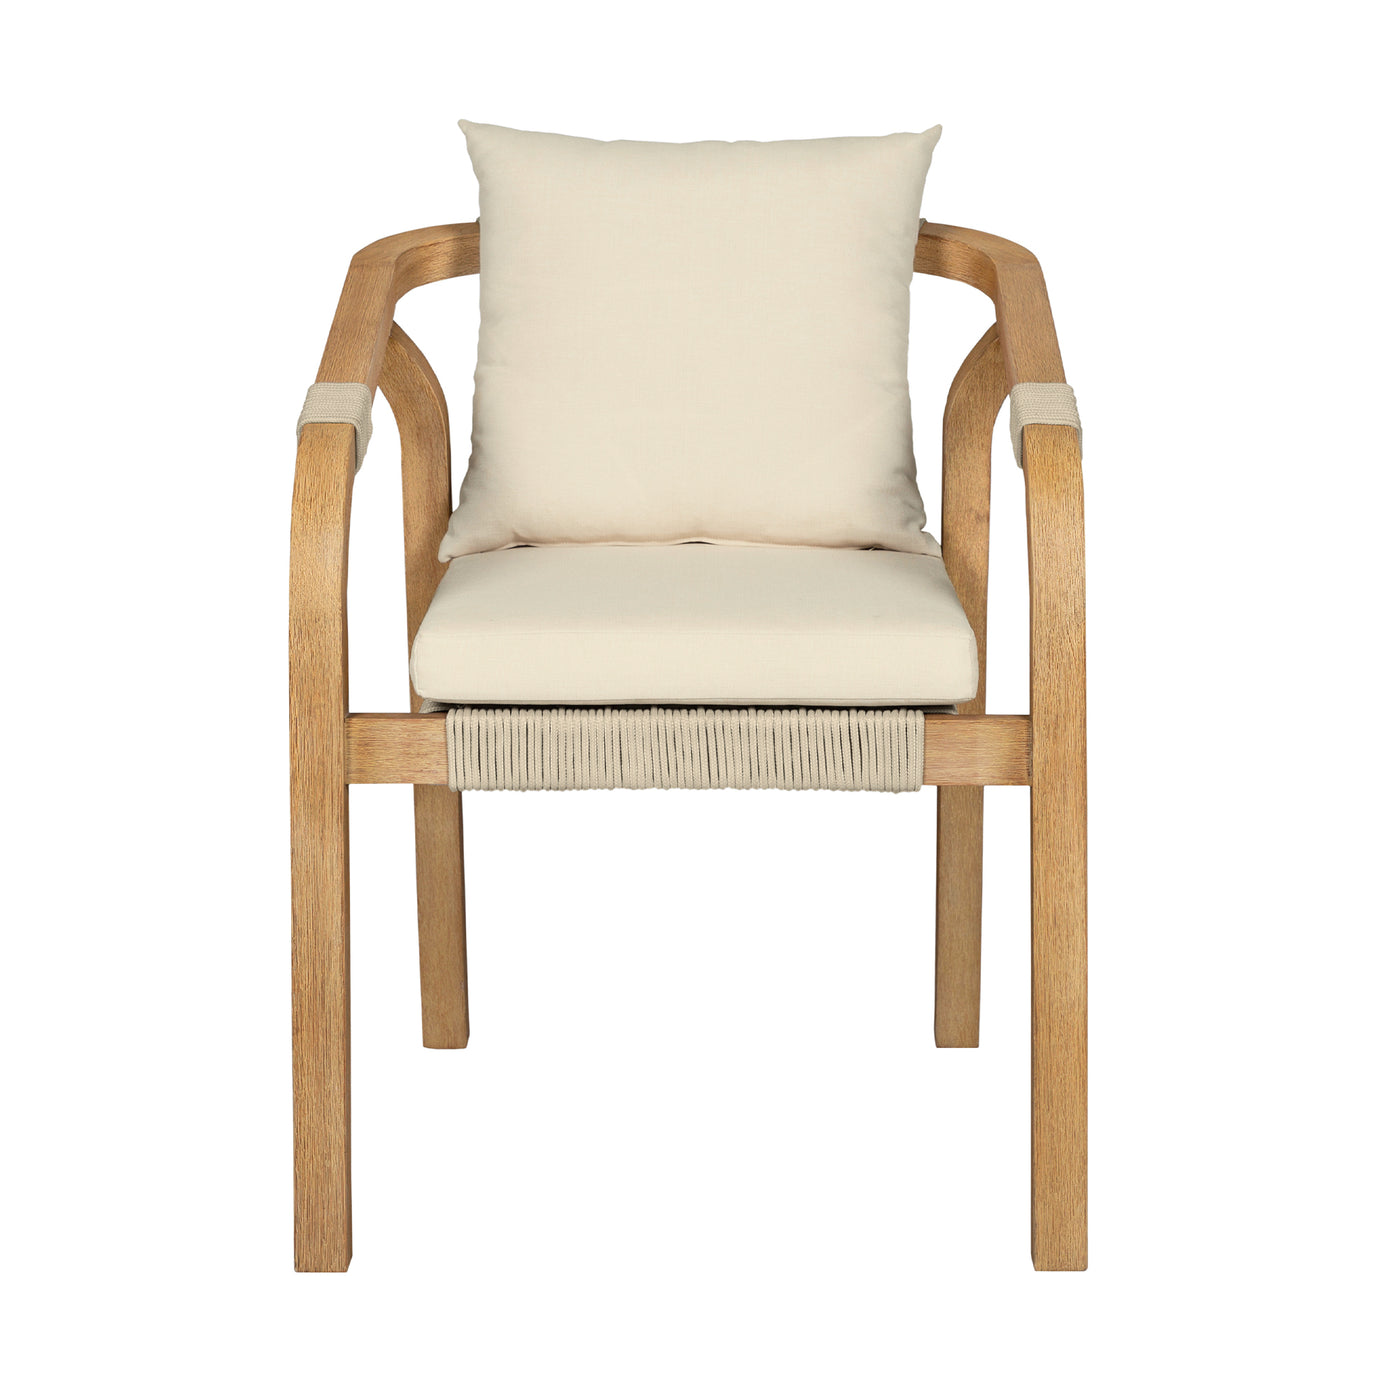 Cypress Outdoor Dining Chair